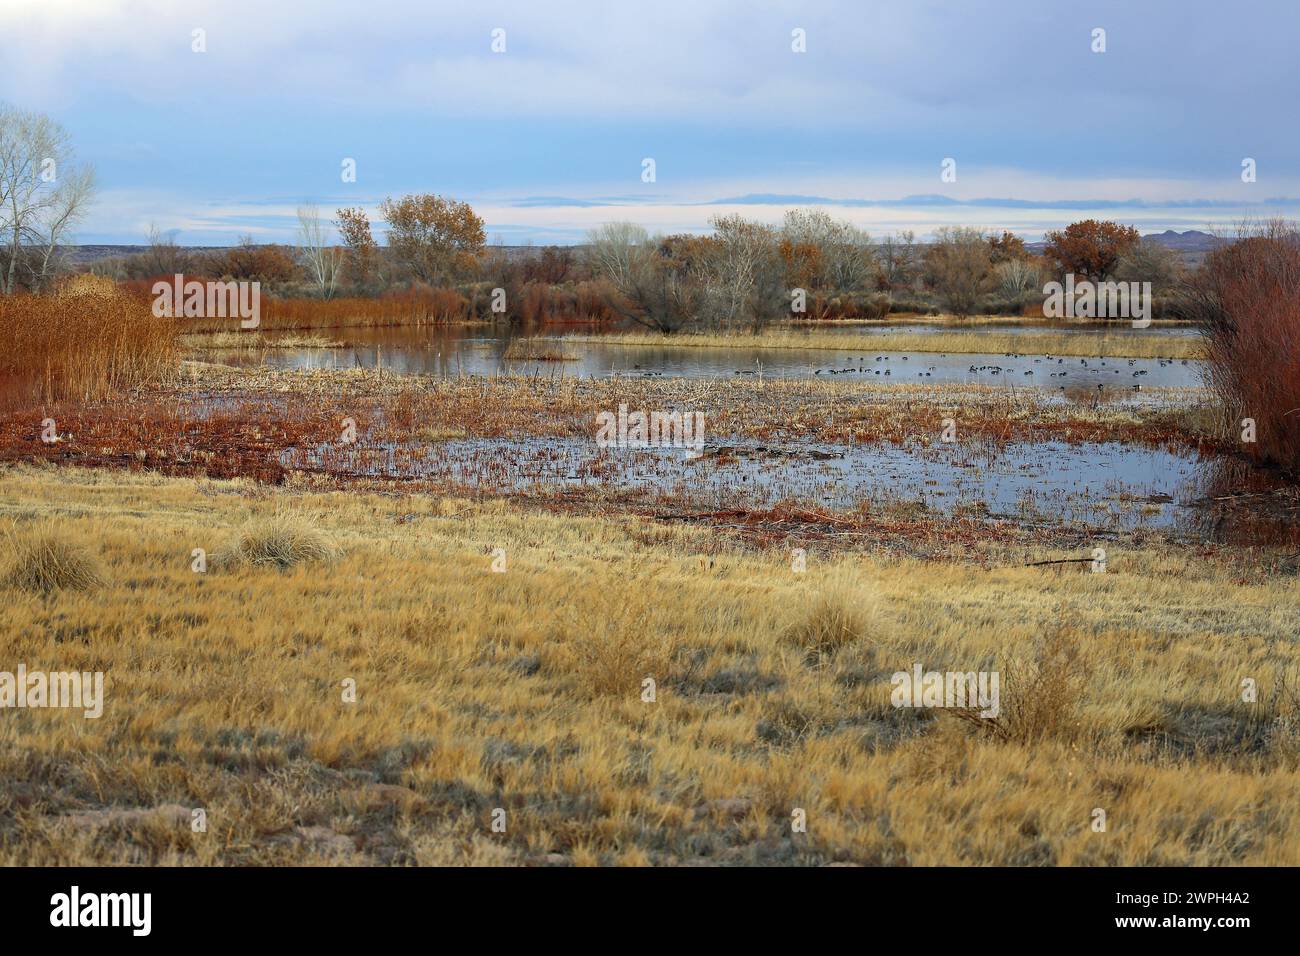 Landscape from visitor center - Bosque del Apache National Wildlife Refuge, New Mexico Stock Photo